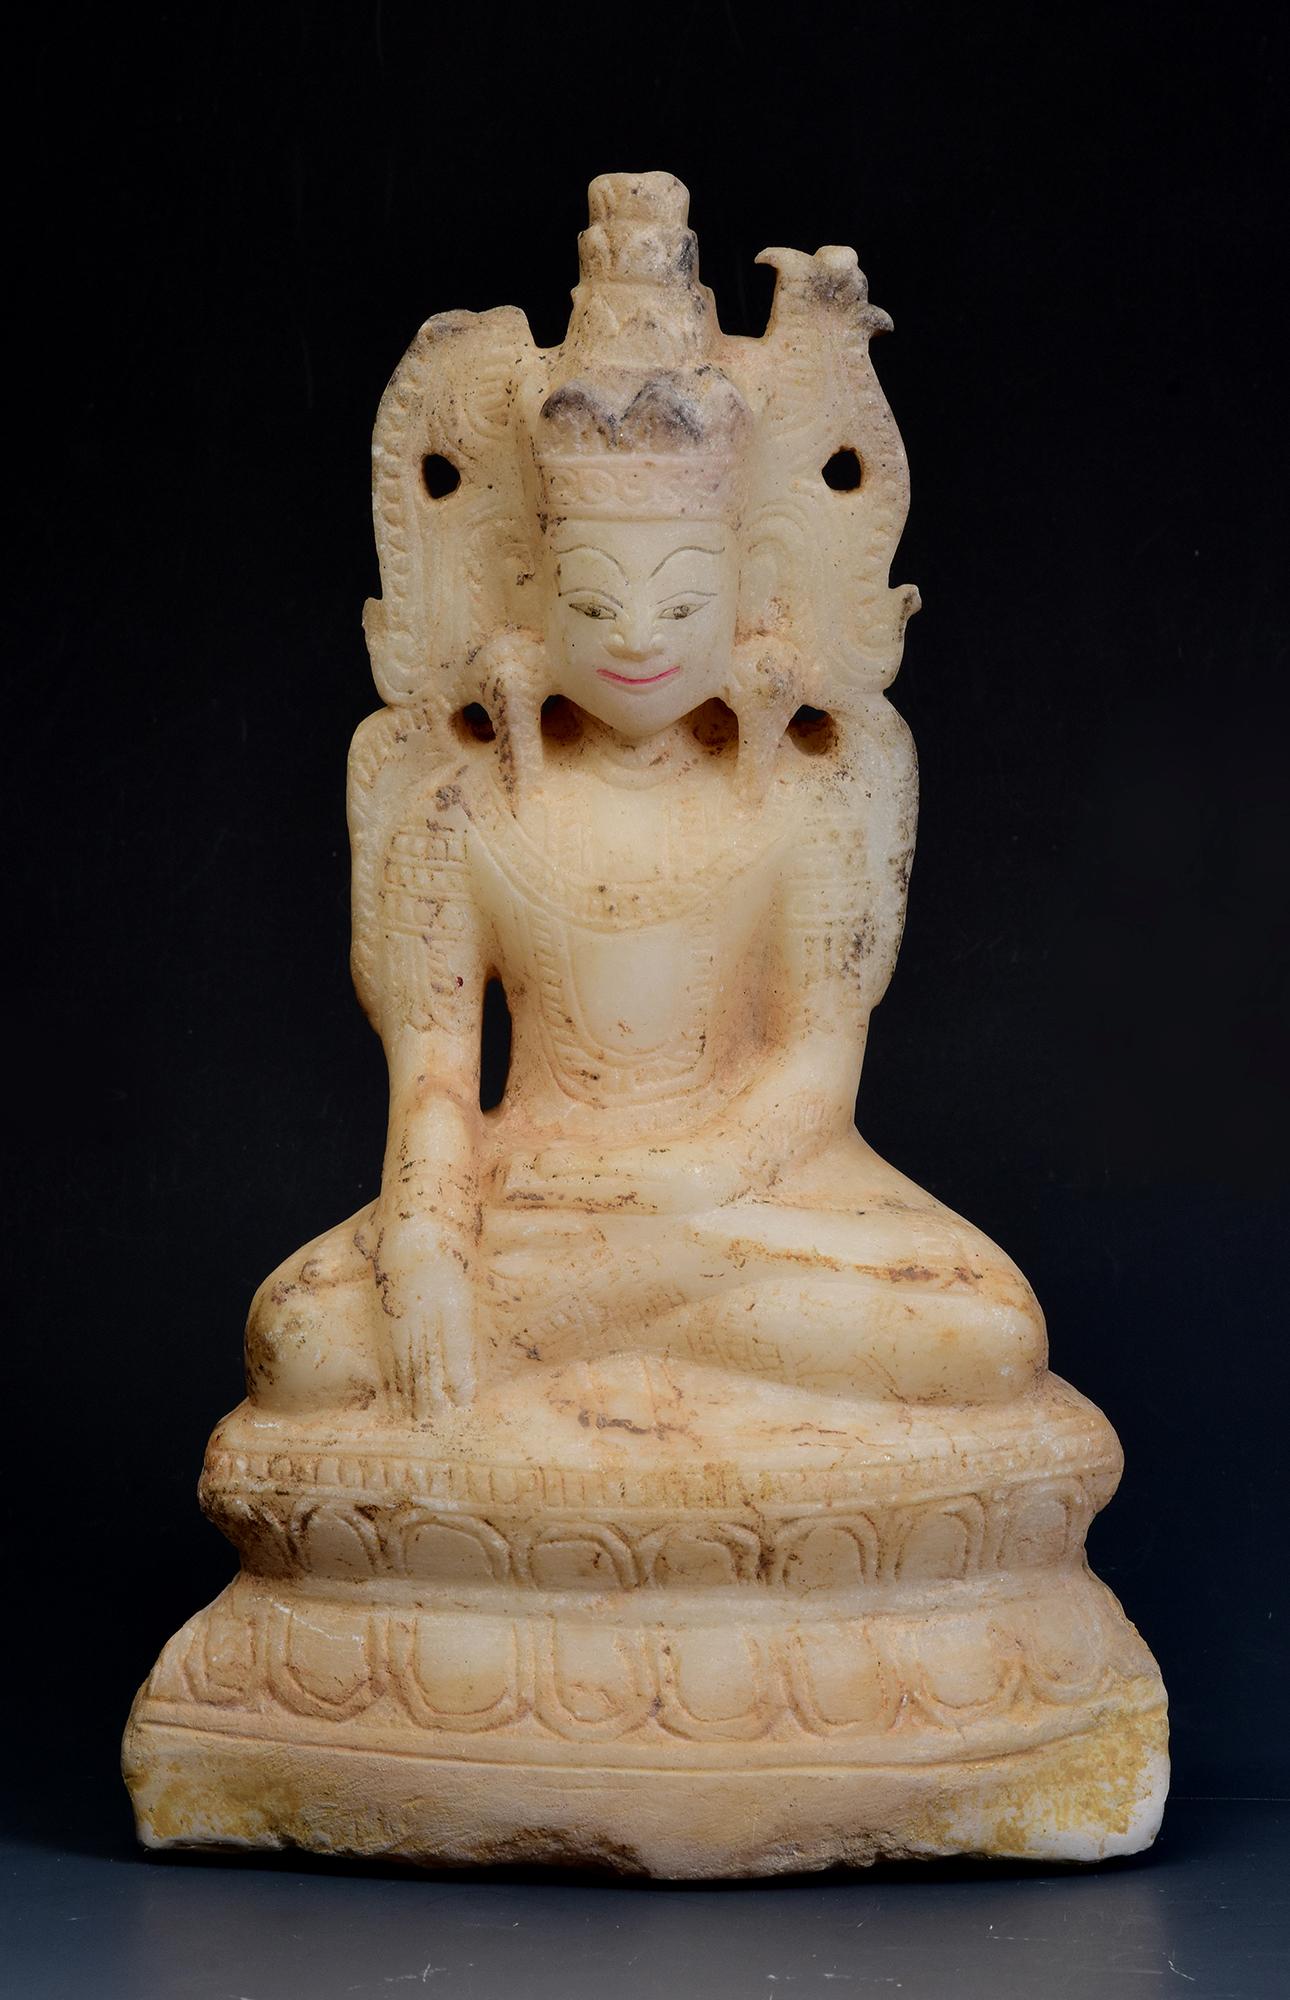 Rare antique Burmese alabaster seated crowned Buddha or sometimes known as 'King Buddha', wearing diadem-crowns and ornaments of king instead of ordinary monk's robes.

Age: Burma, Shan Period, 18th Century
Size: Height 24.8 C.M. / Width 15.5 C.M. /